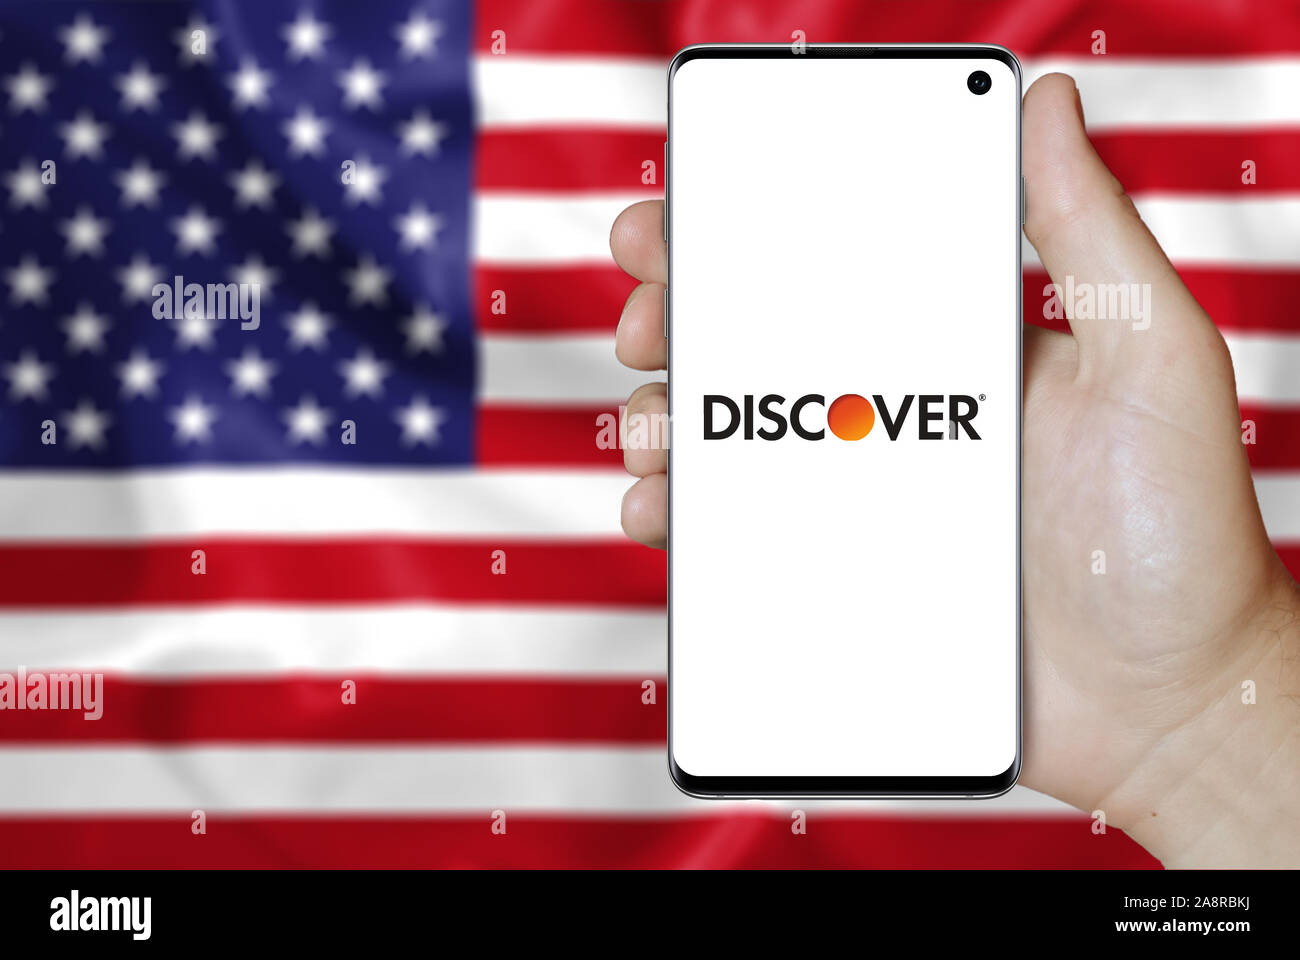 Logo of public company Discover Financial Services displayed on a smartphone. Flag of USA background. Credit: PIXDUCE Stock Photo